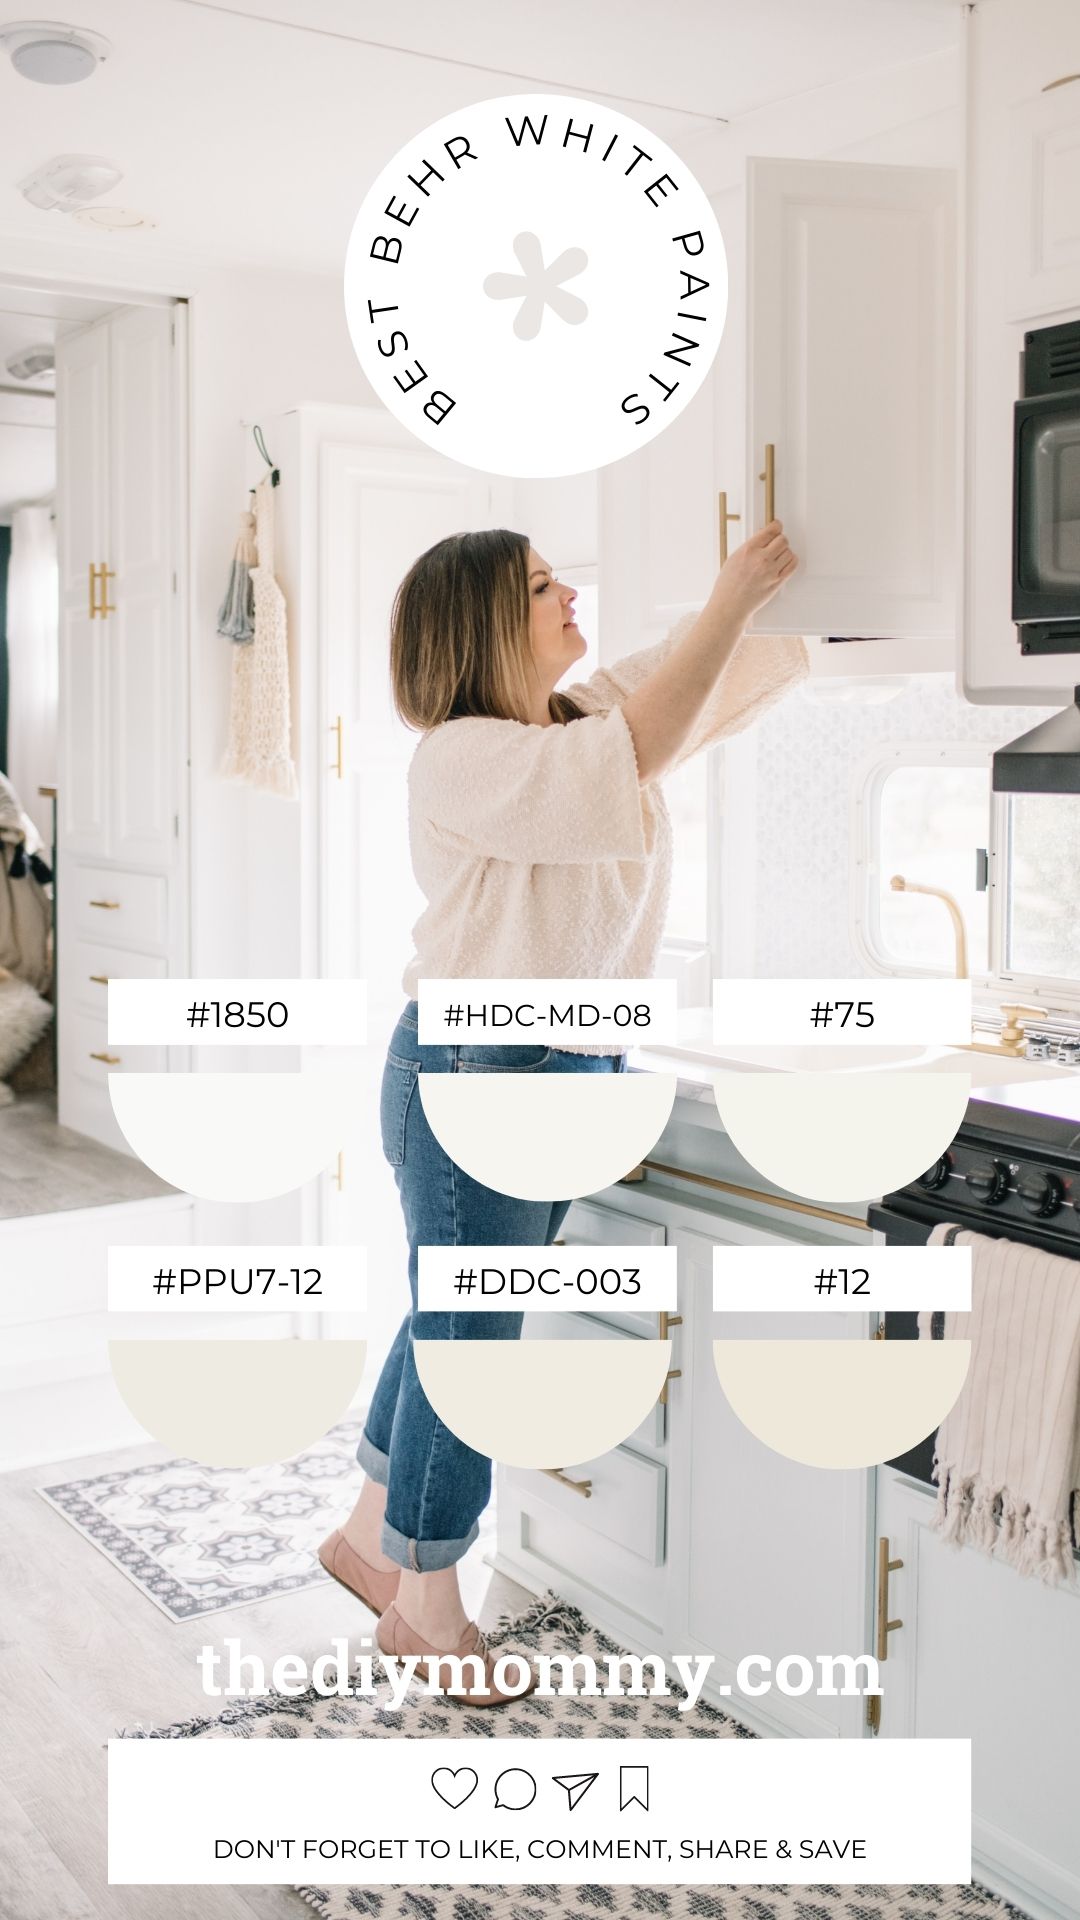 The Best Behr White Paint Colours & Tips for Choosing One